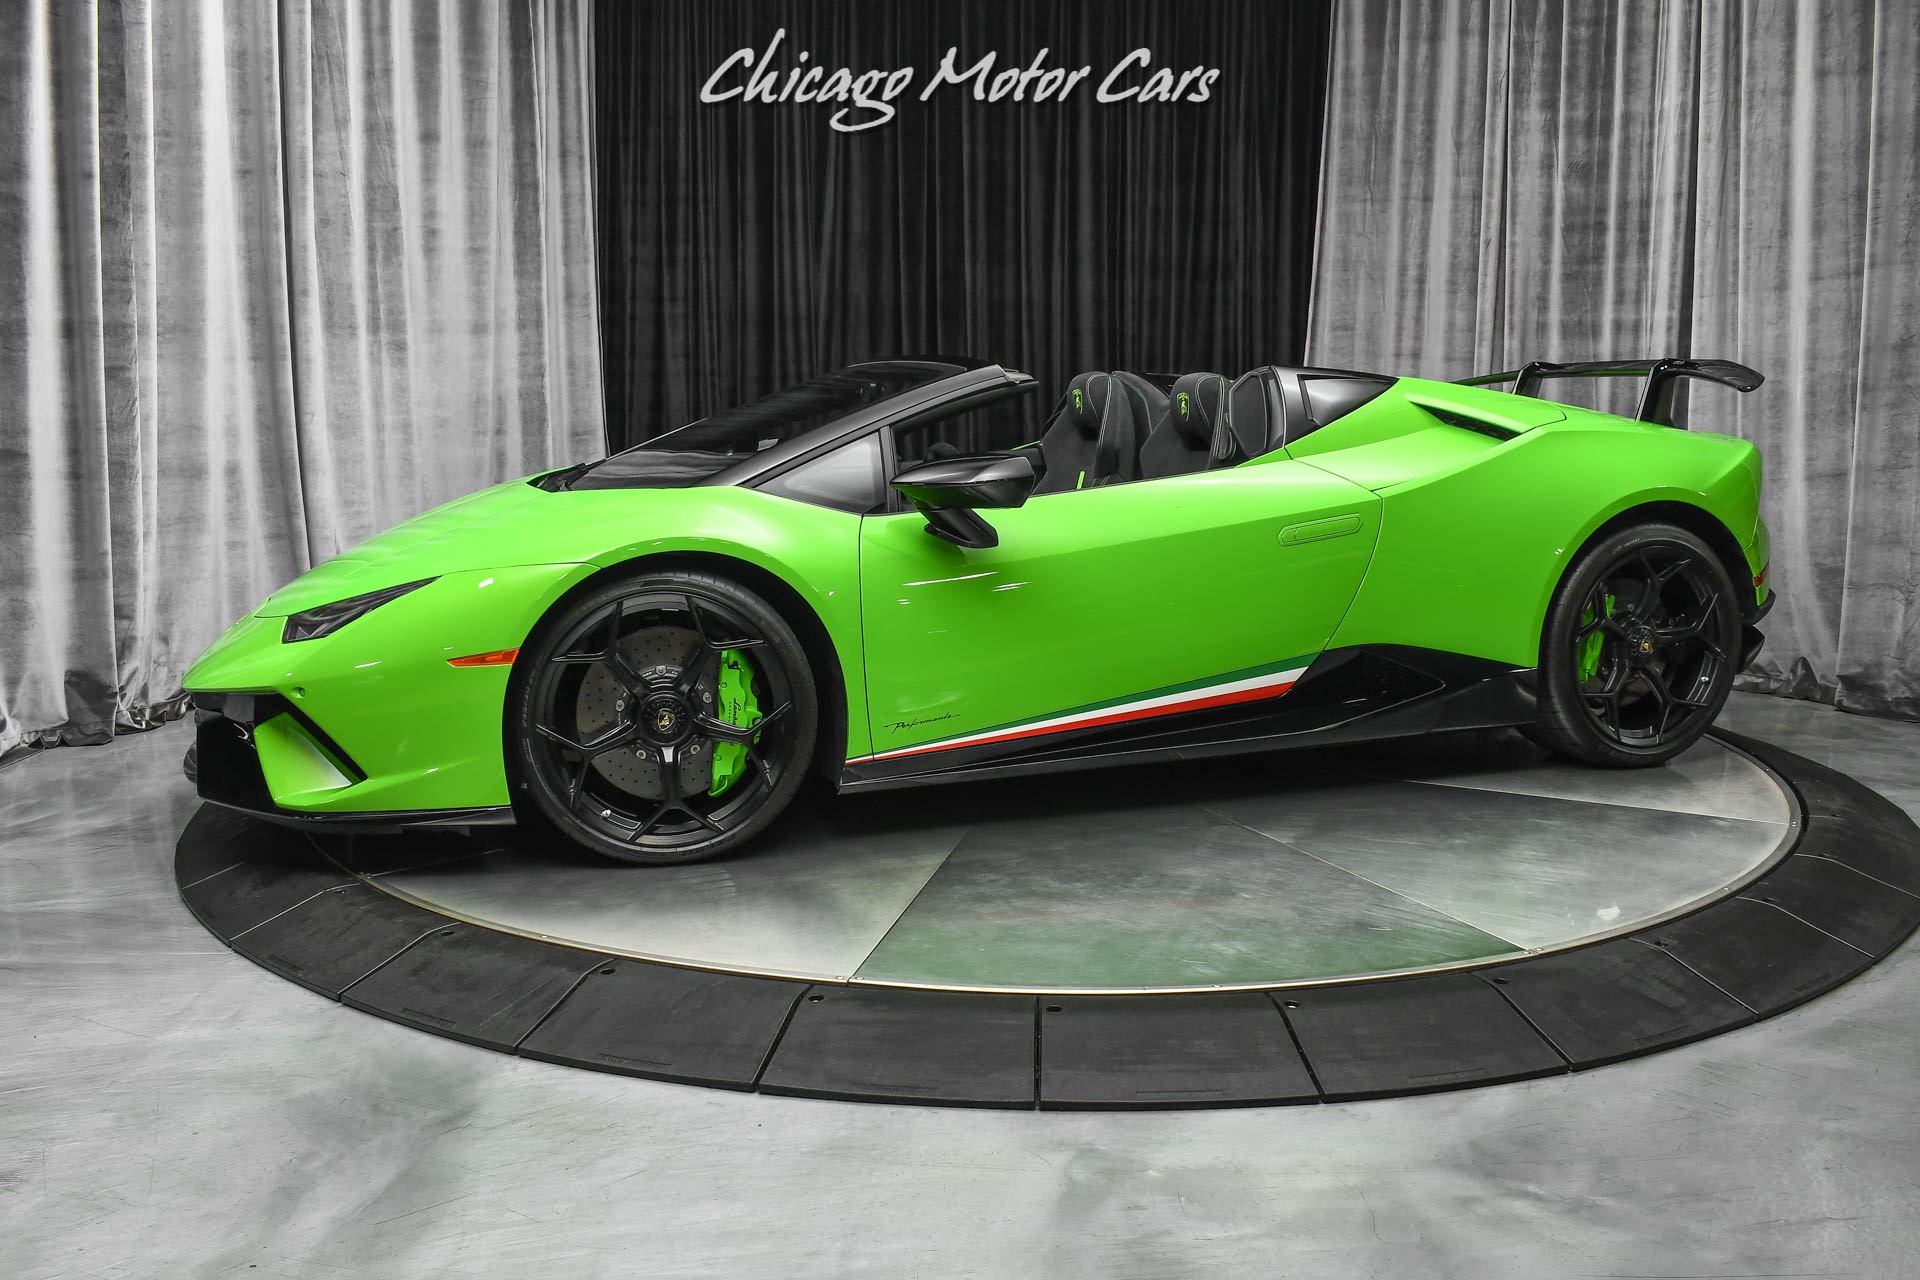 Used 2019 Lamborghini Huracan LP640-4 Performante Spyder LOADED! Only 1800  Miles! Carbon Fiber! For Sale ($399,800) | Chicago Motor Cars Stock #18572